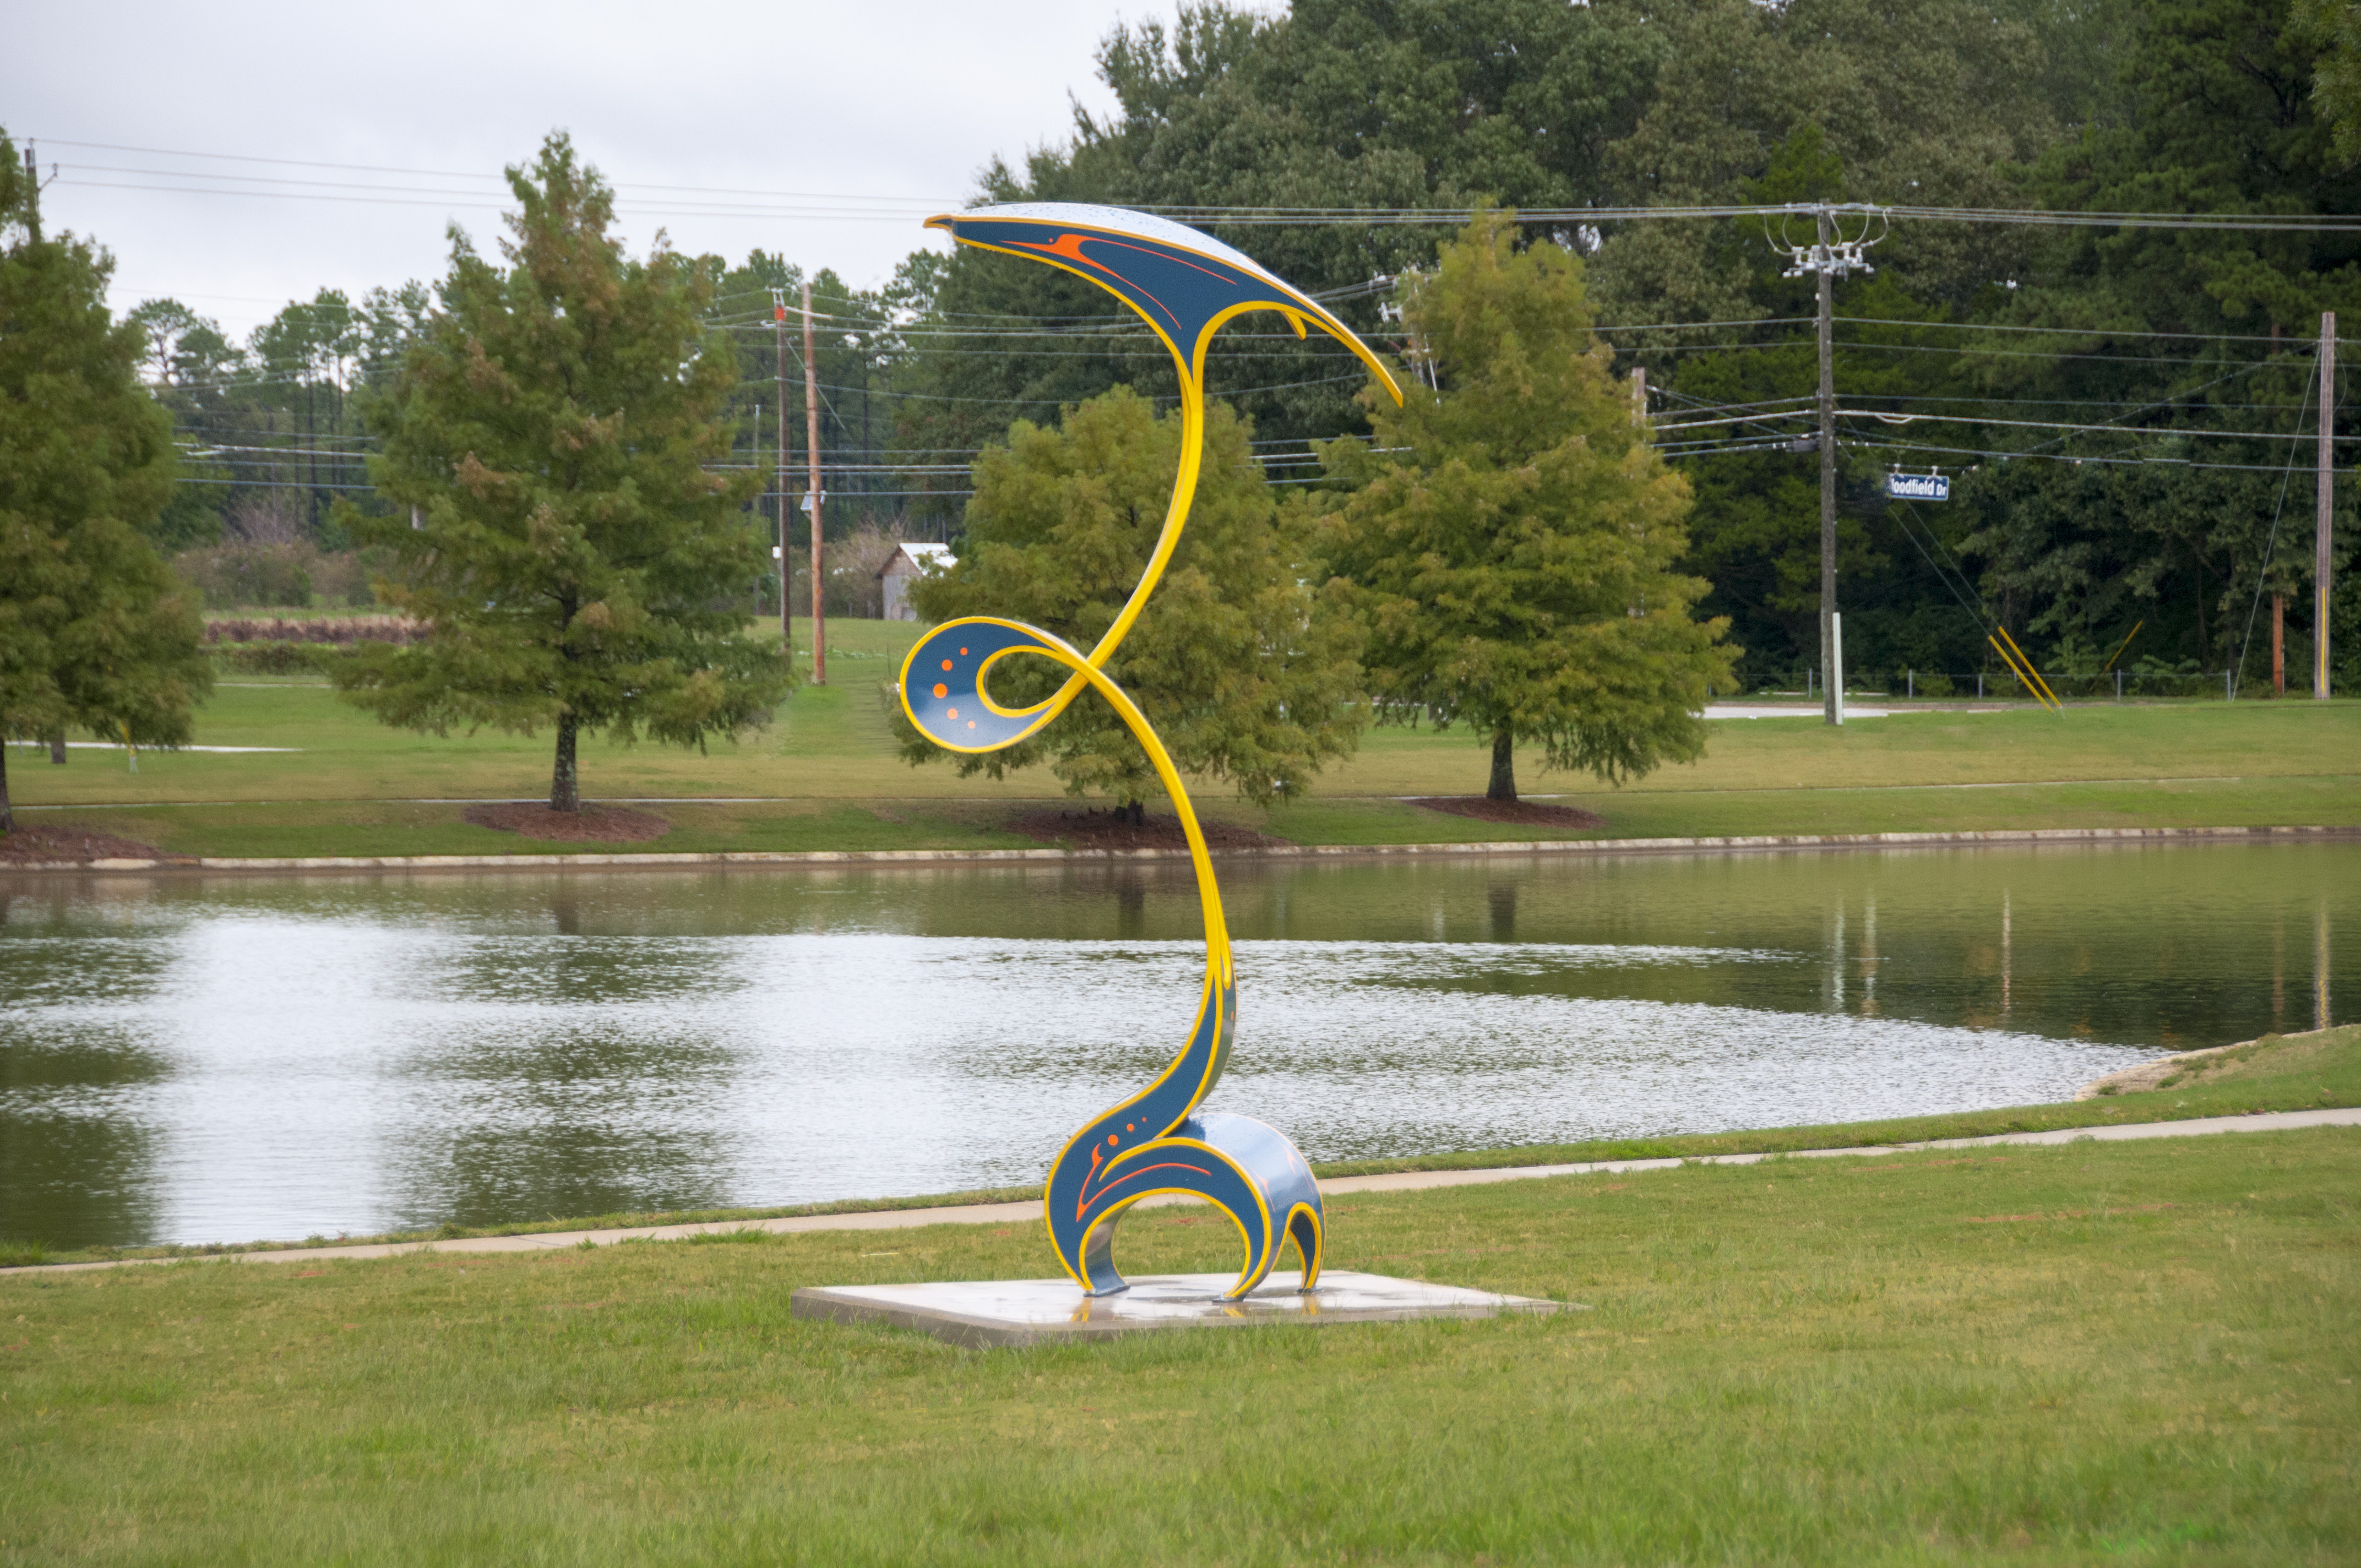 An outdoor sculpture with painted curves